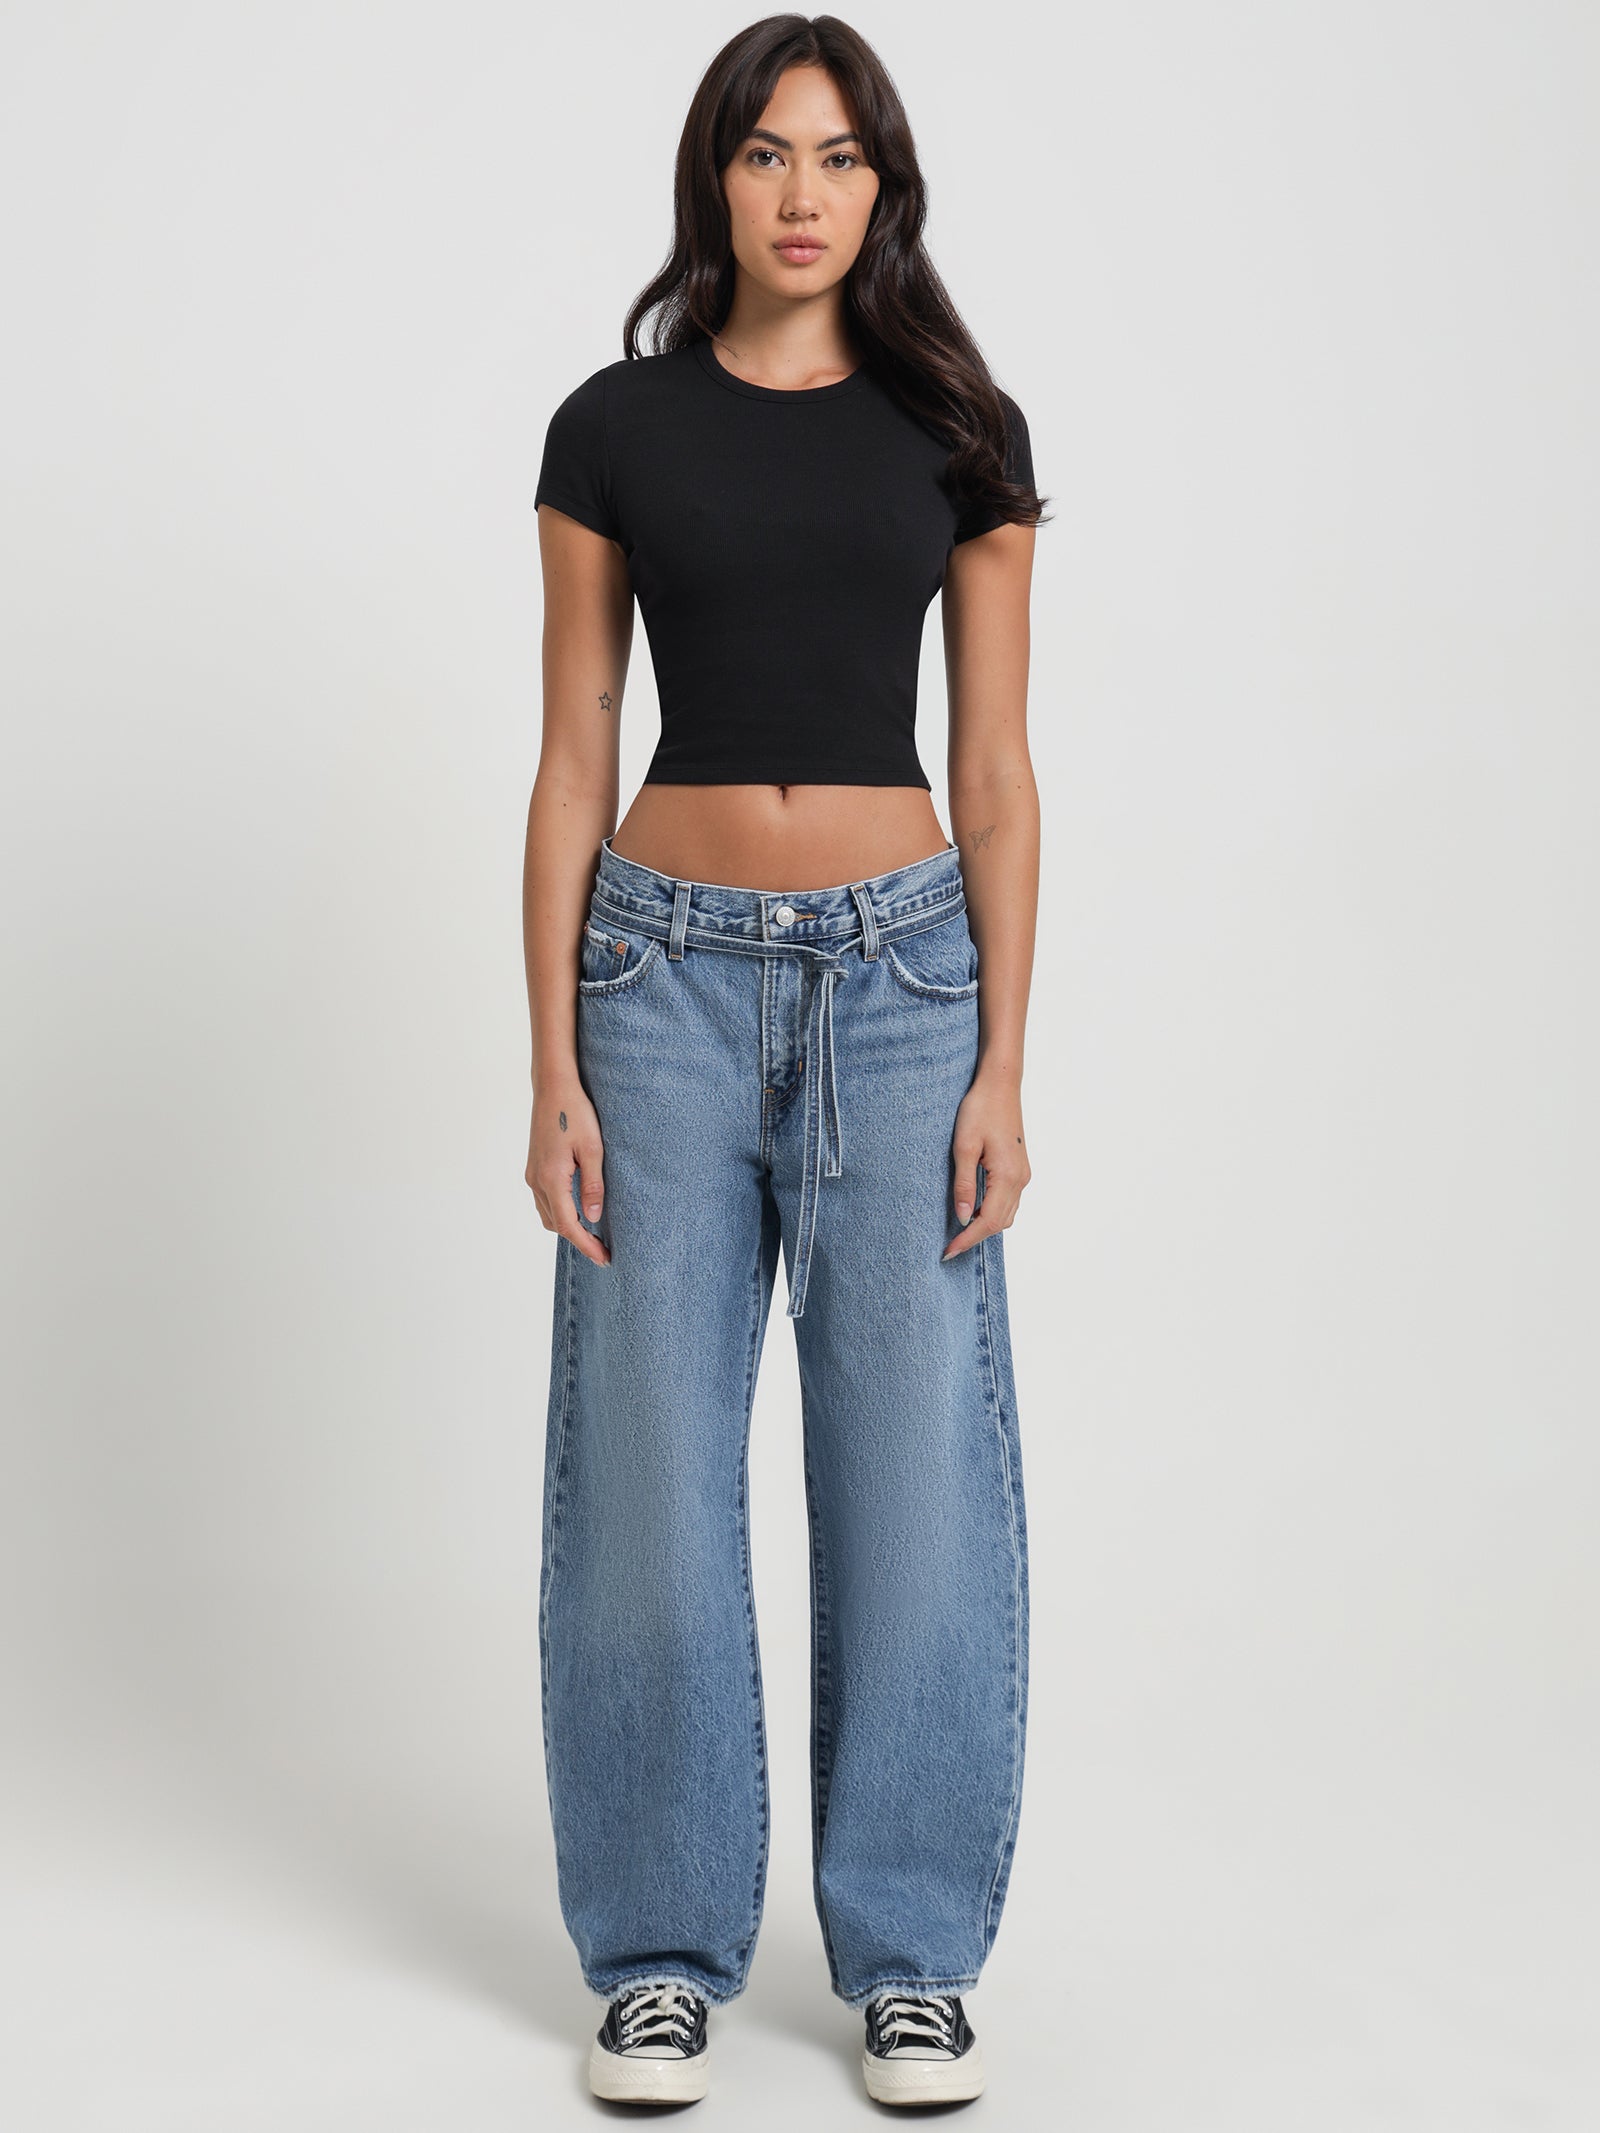 XL Balloon Jeans in Daily Saver - Glue Store